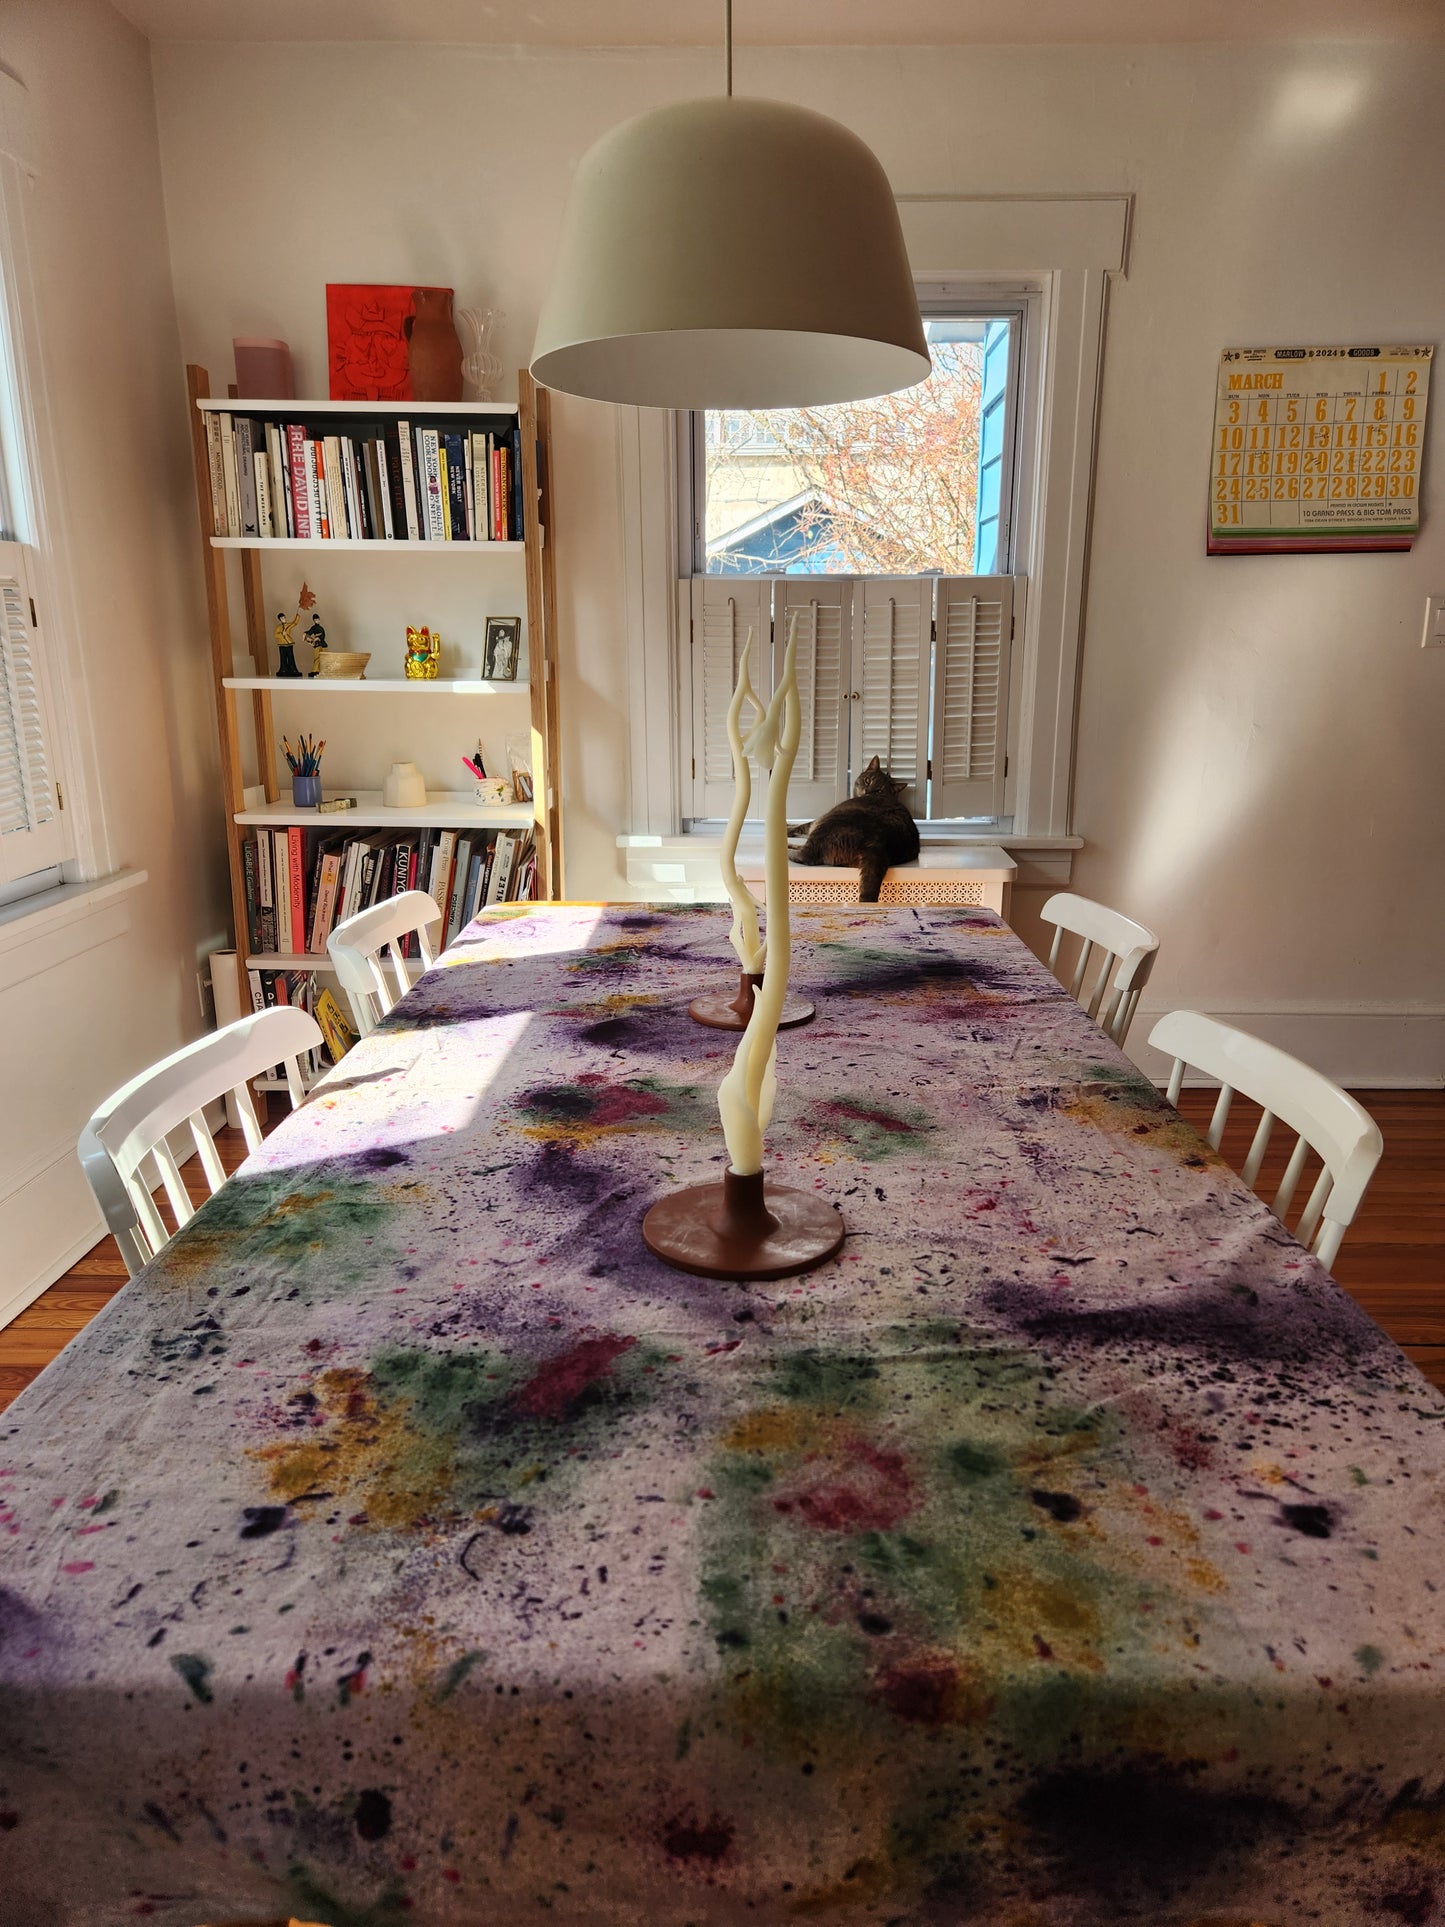 Abstract Speckled Dyed Linen Blend Tablecloth